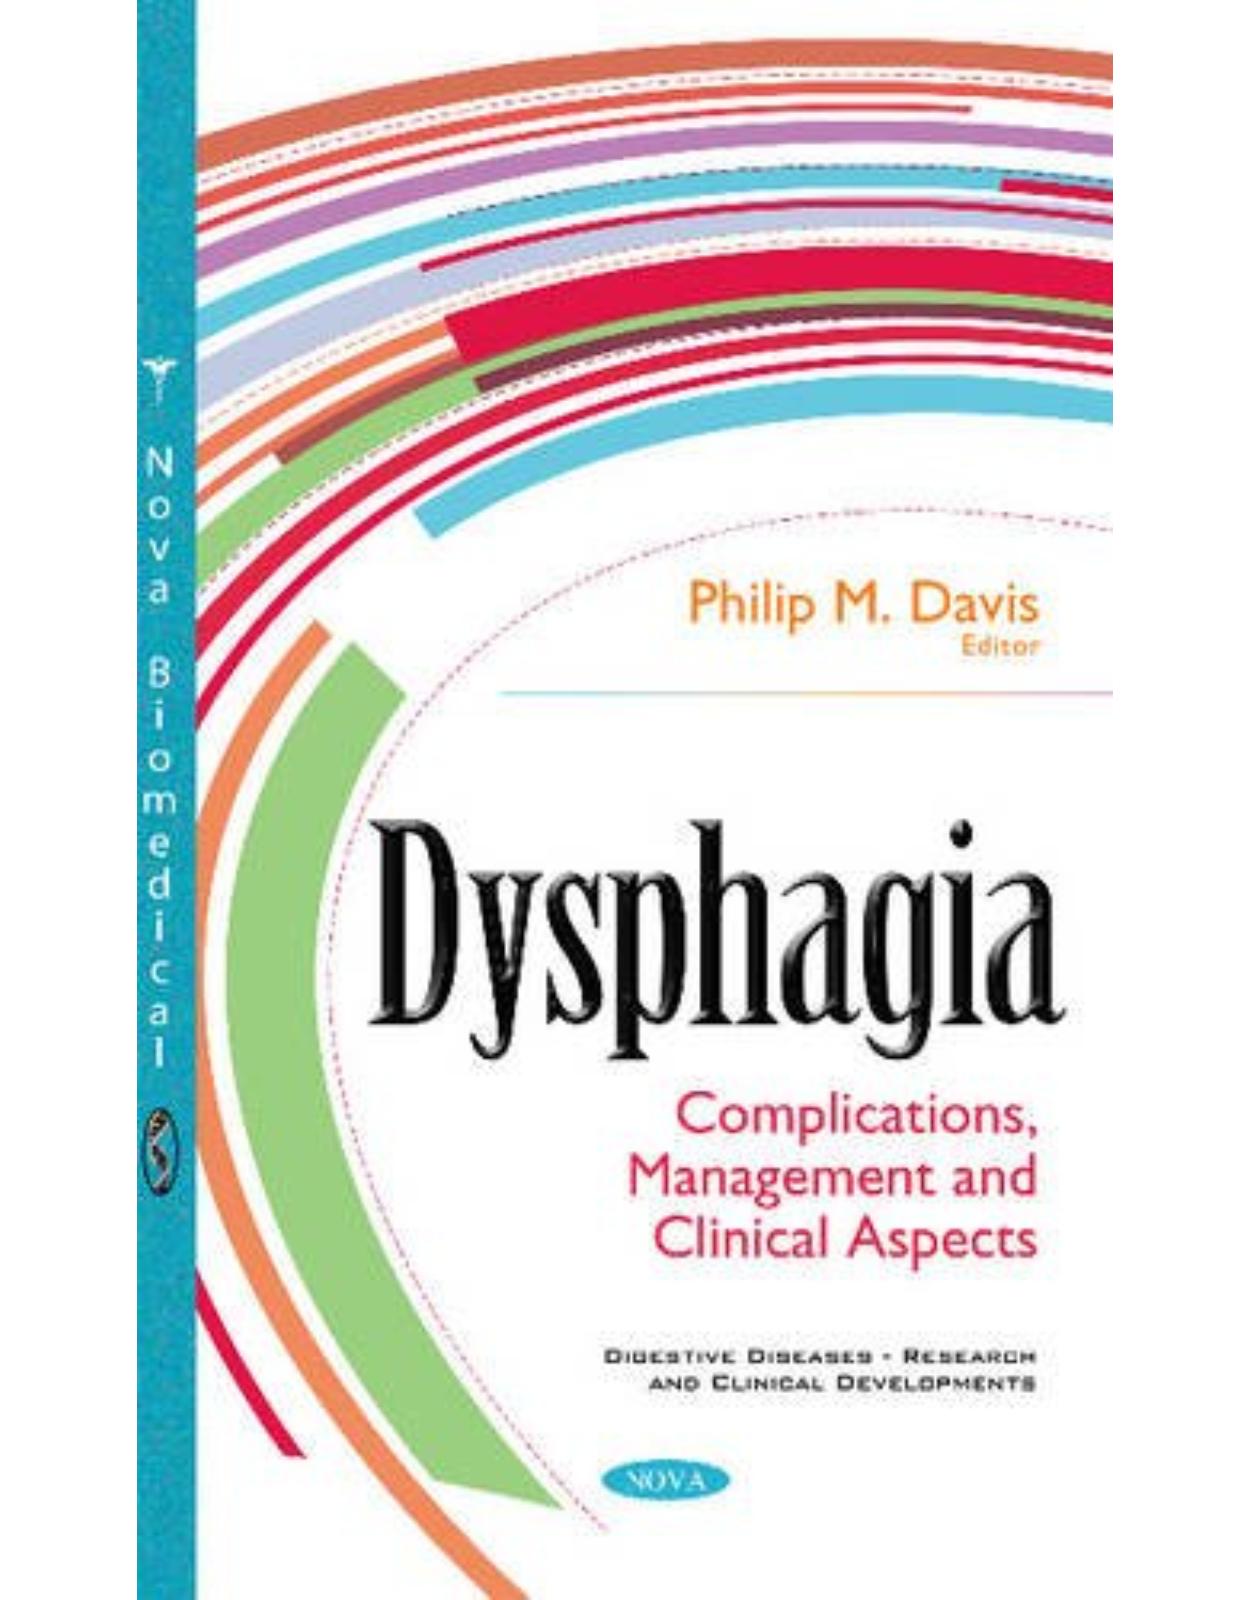 Dysphagia: Complications, Management & Clinical Aspects